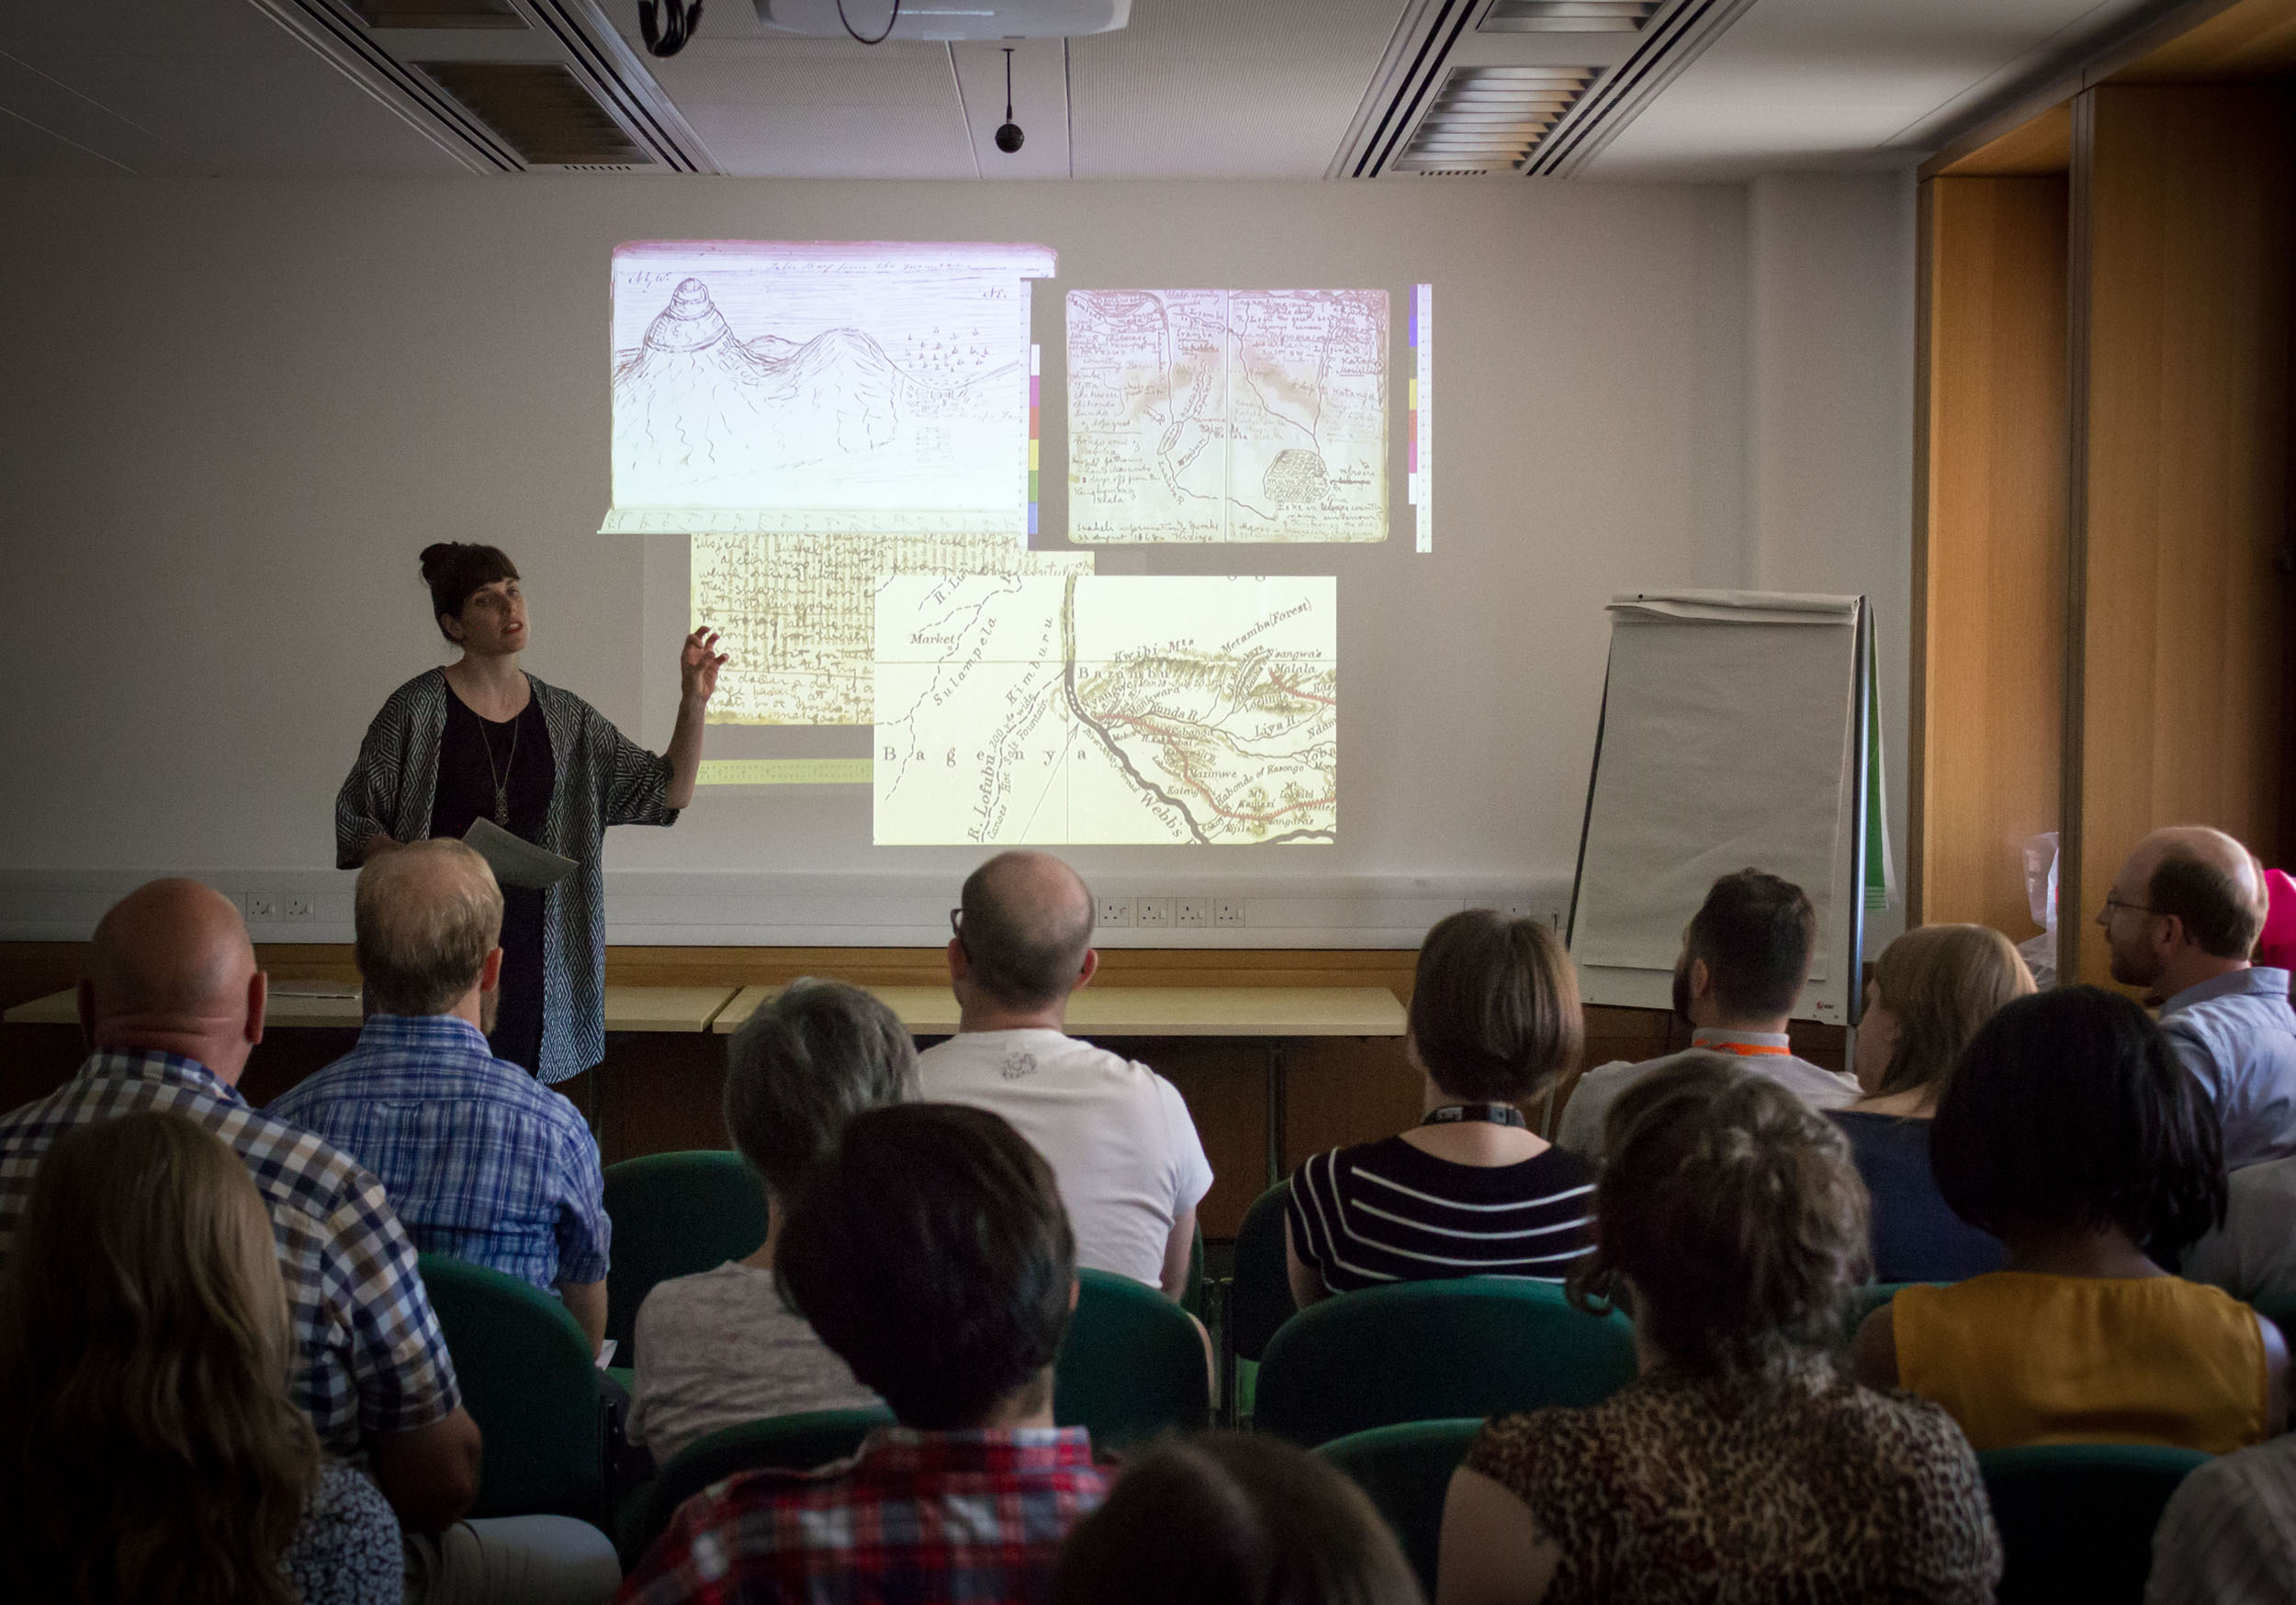 Megan Ward lectures on the new Livingstone Online at the British Library, 2015. Copyright Angela Aliff. Creative Commons Attribution-NonCommercial 3.0 Unported (https://creativecommons.org/licenses/by-nc/3.0/)